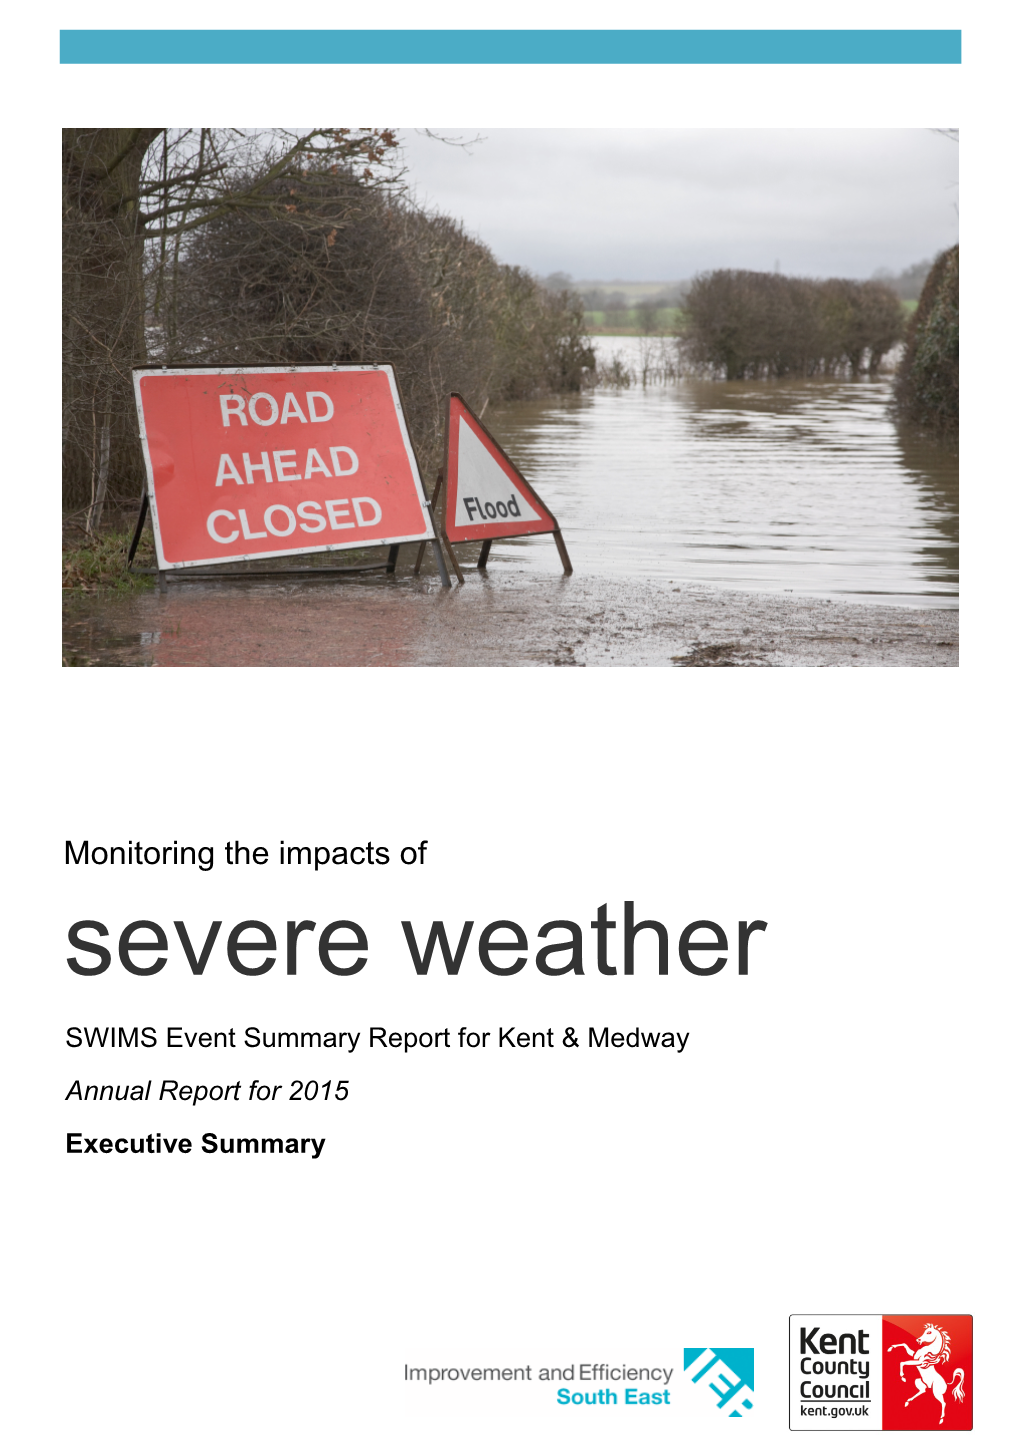 Severe Weather SWIMS Event Summary Report for Kent & Medway Annual Report for 2015 Executive Summary